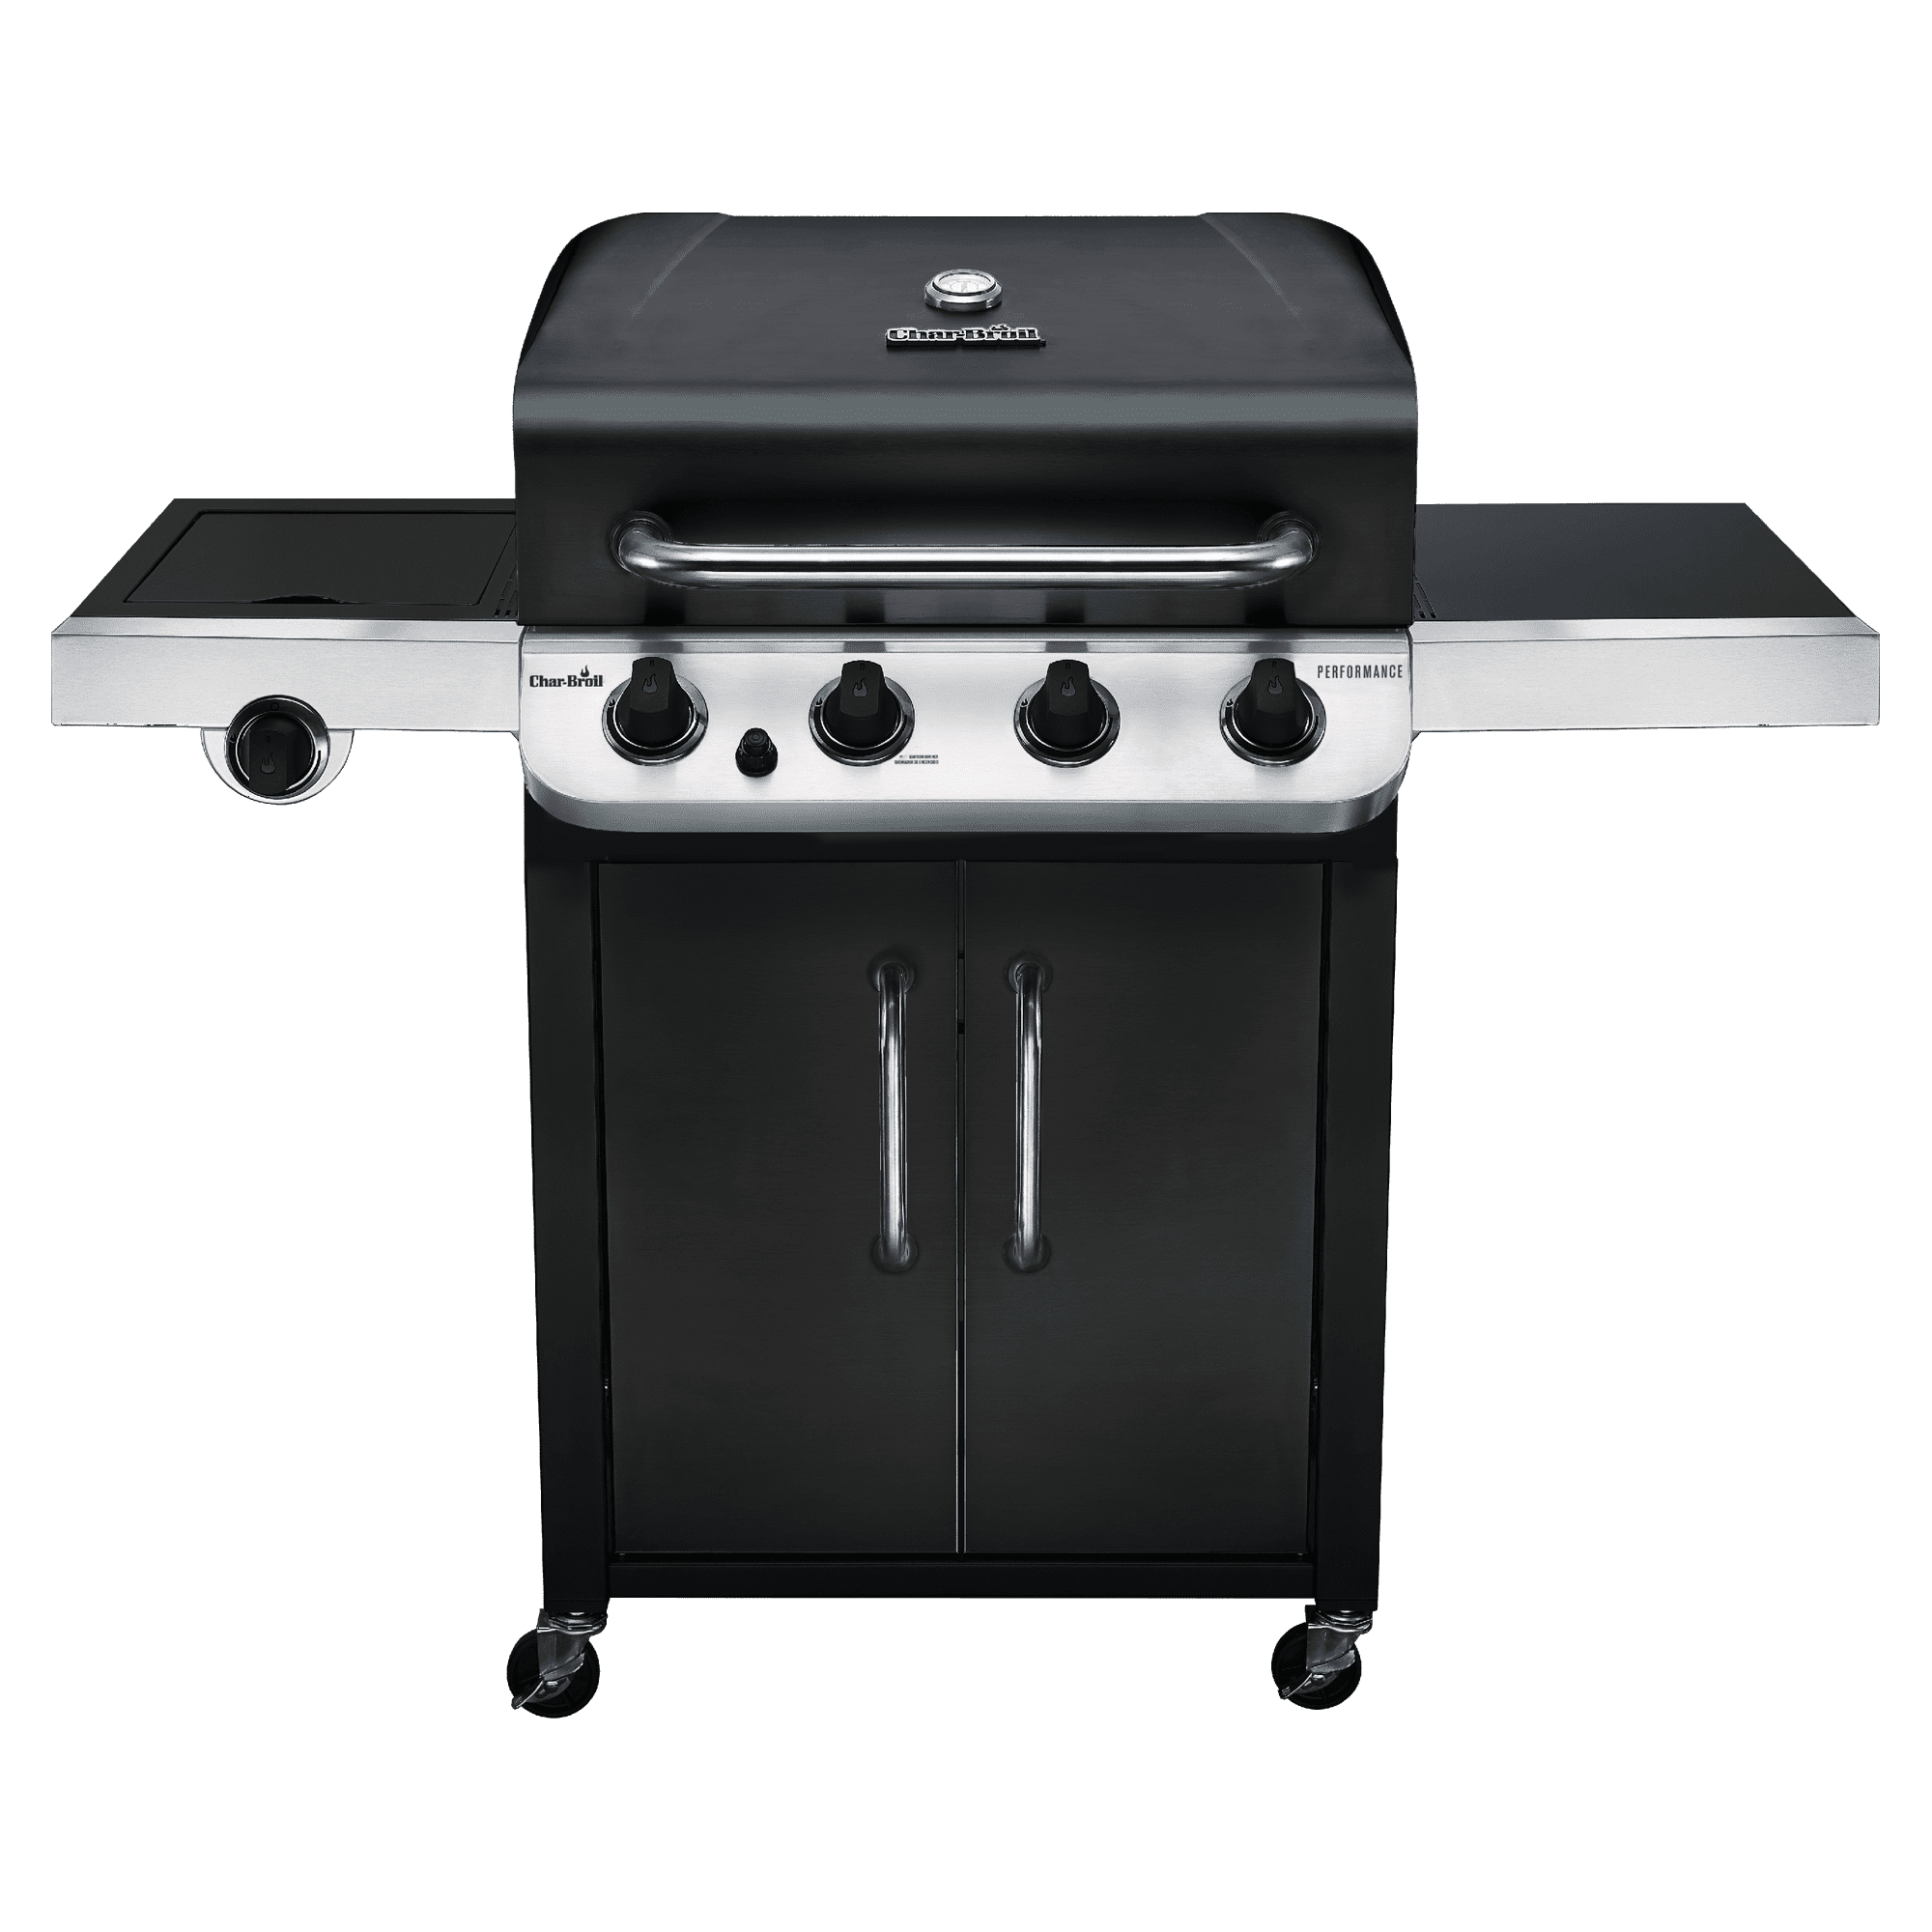 Char Broil Signature Tru Infrared Series 4 Burner Grill Silver Black 525 Sq In Propane Gas Grill Gas Grill Reviews Gas Grill